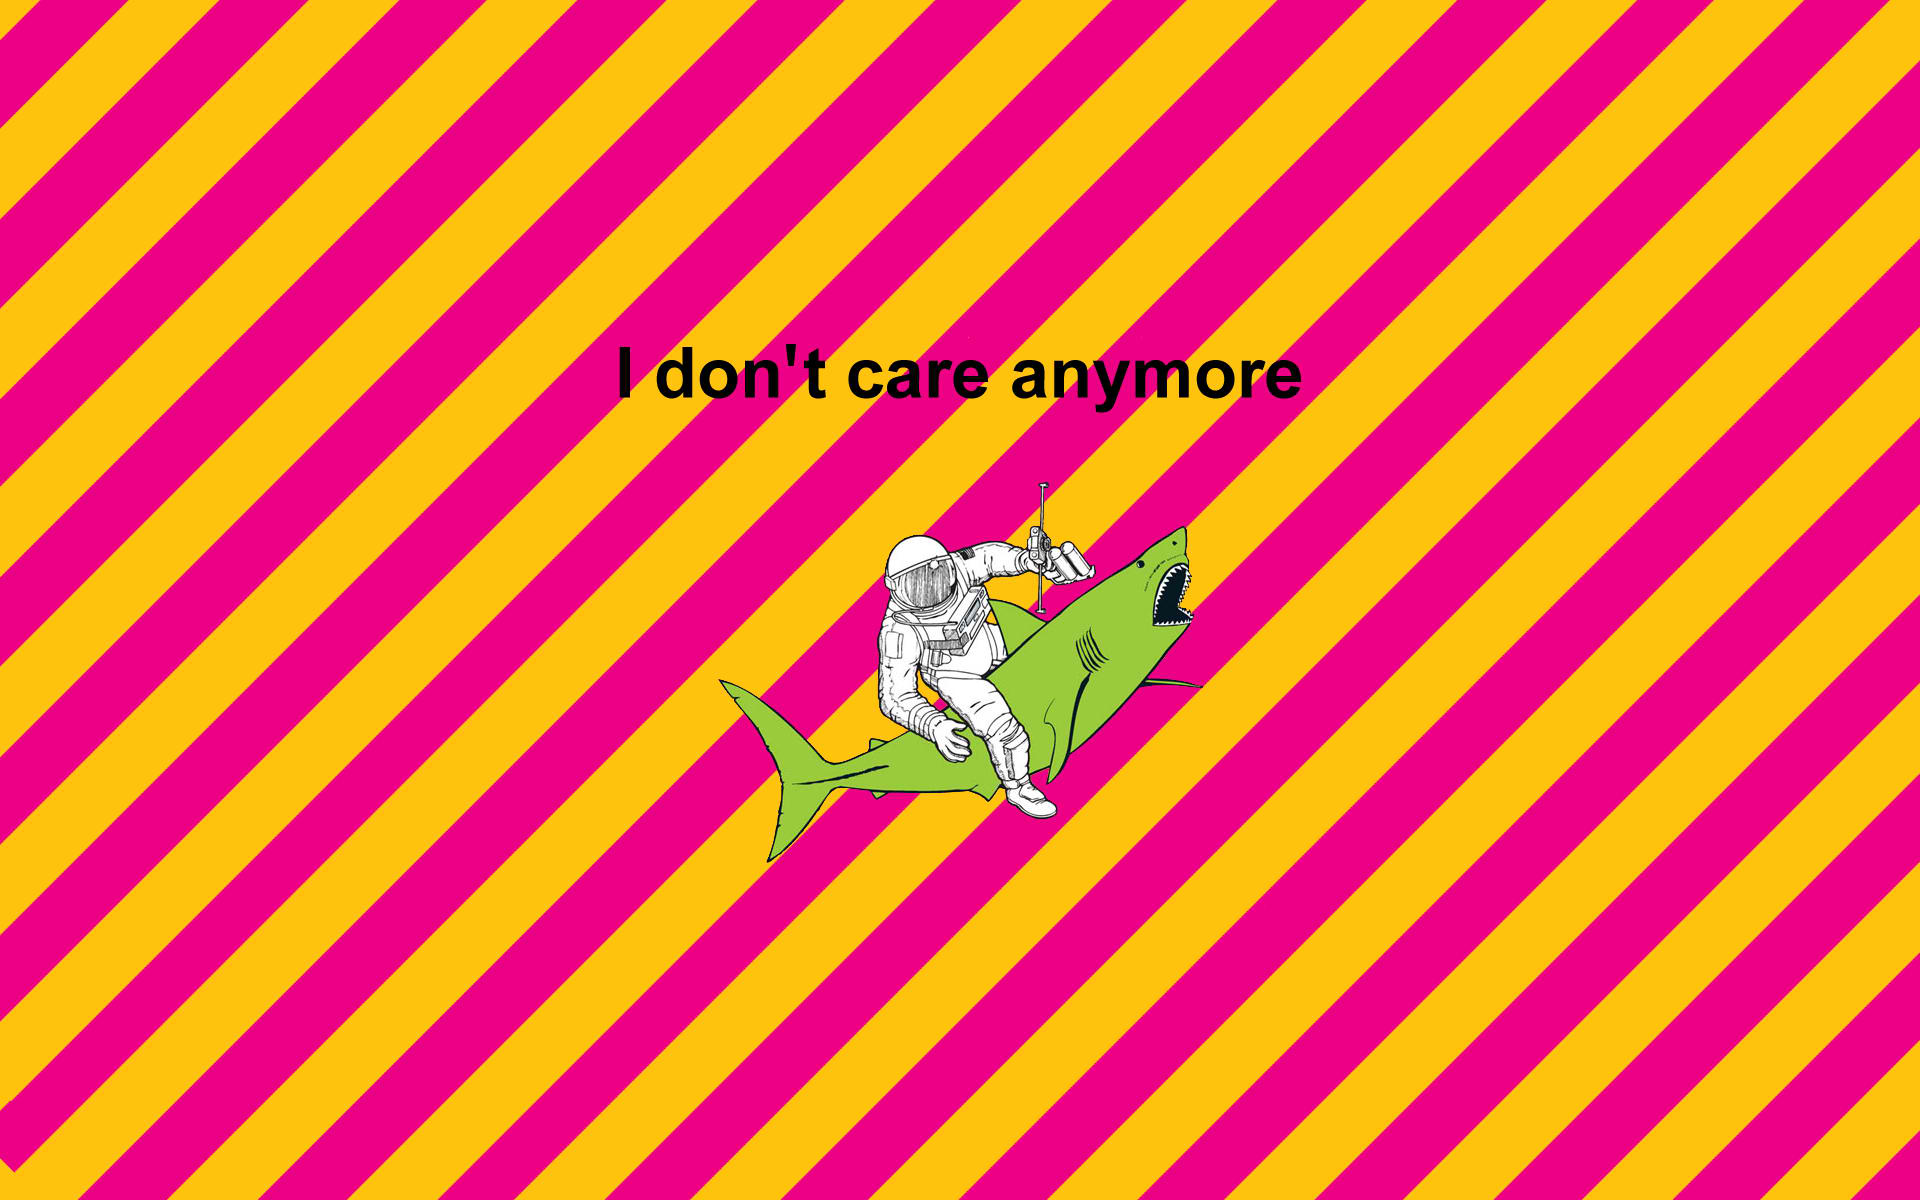 I don't care anymore